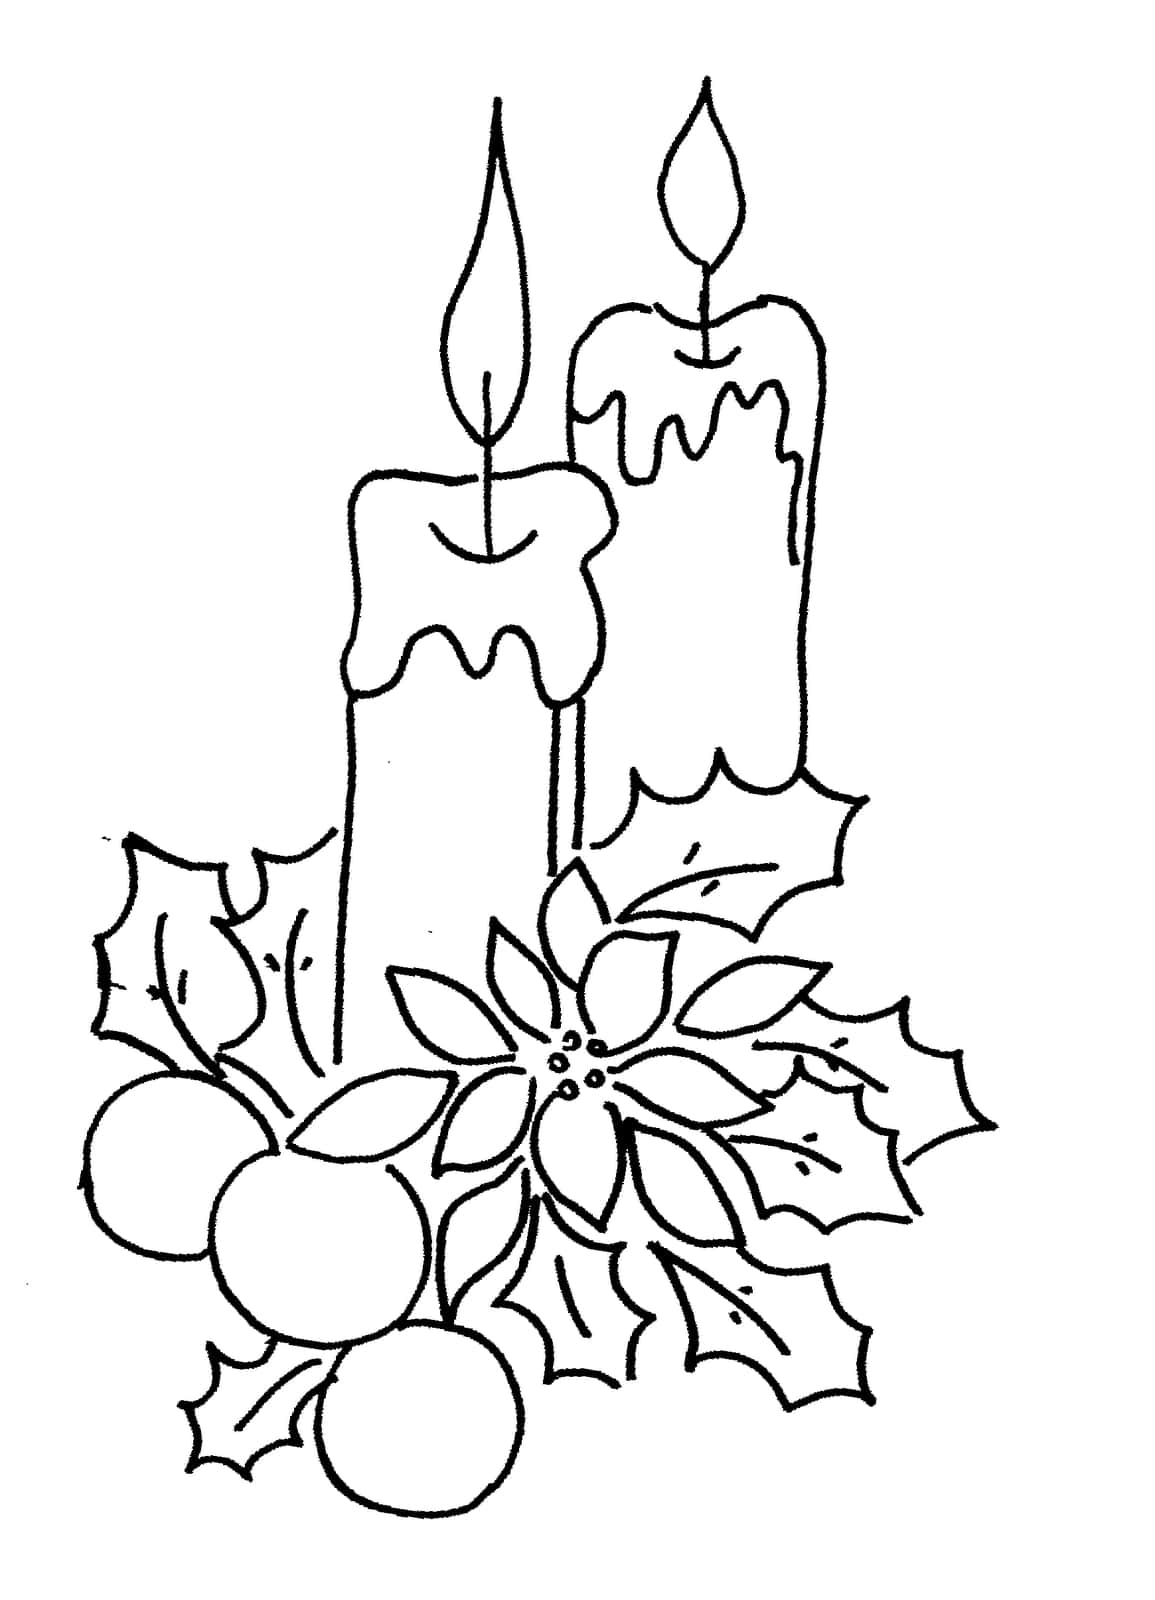 A Kids Christmas Coloring Page